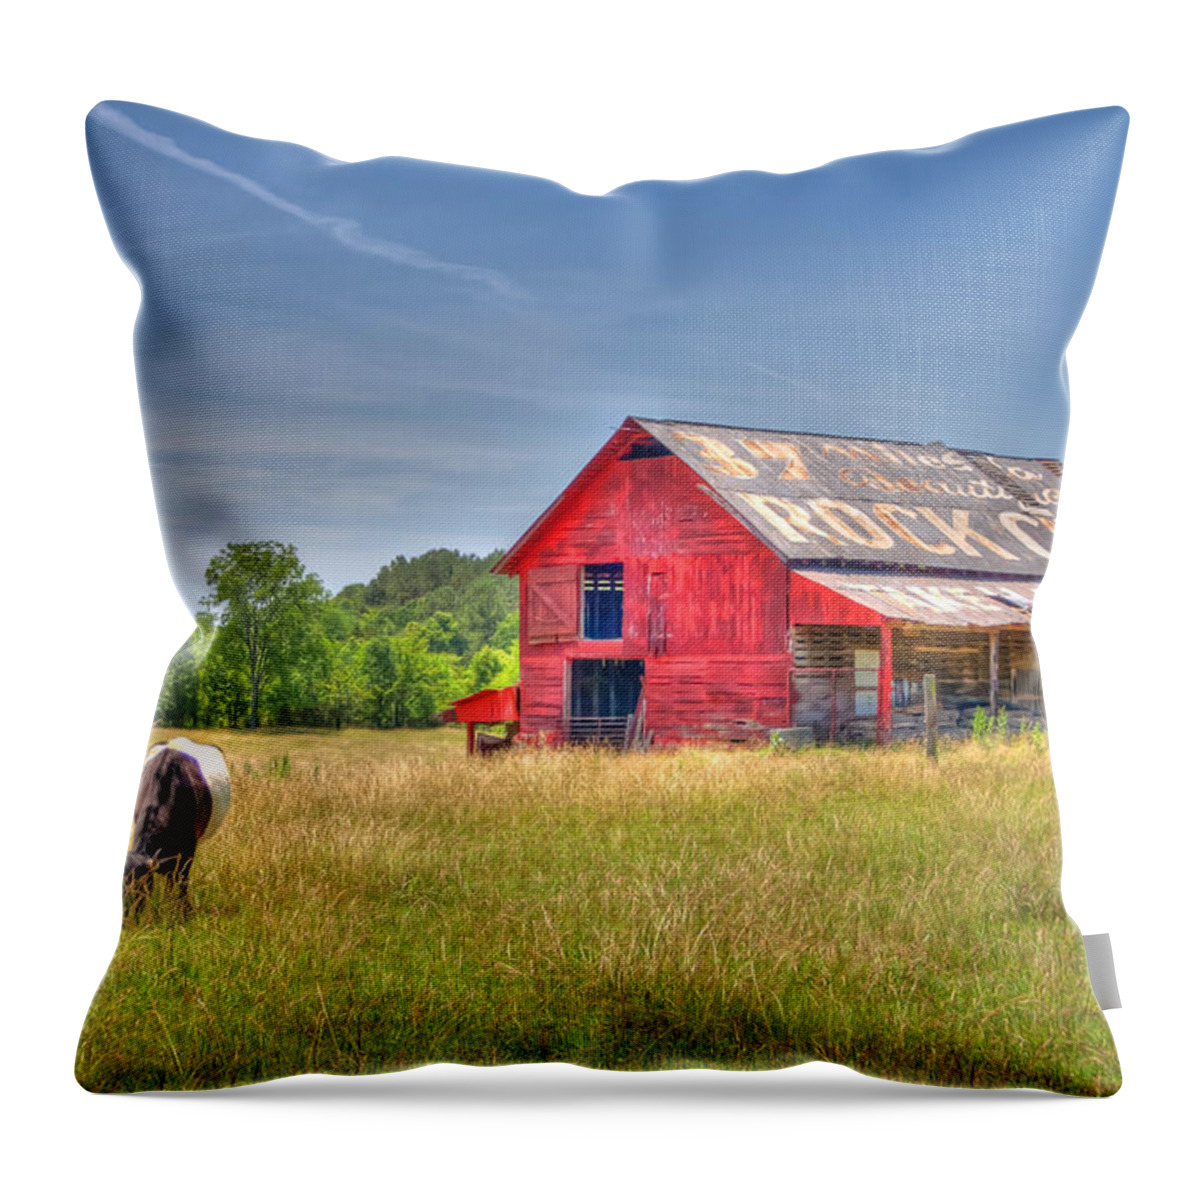 Pasture Throw Pillow featuring the photograph The Pasture by David Troxel